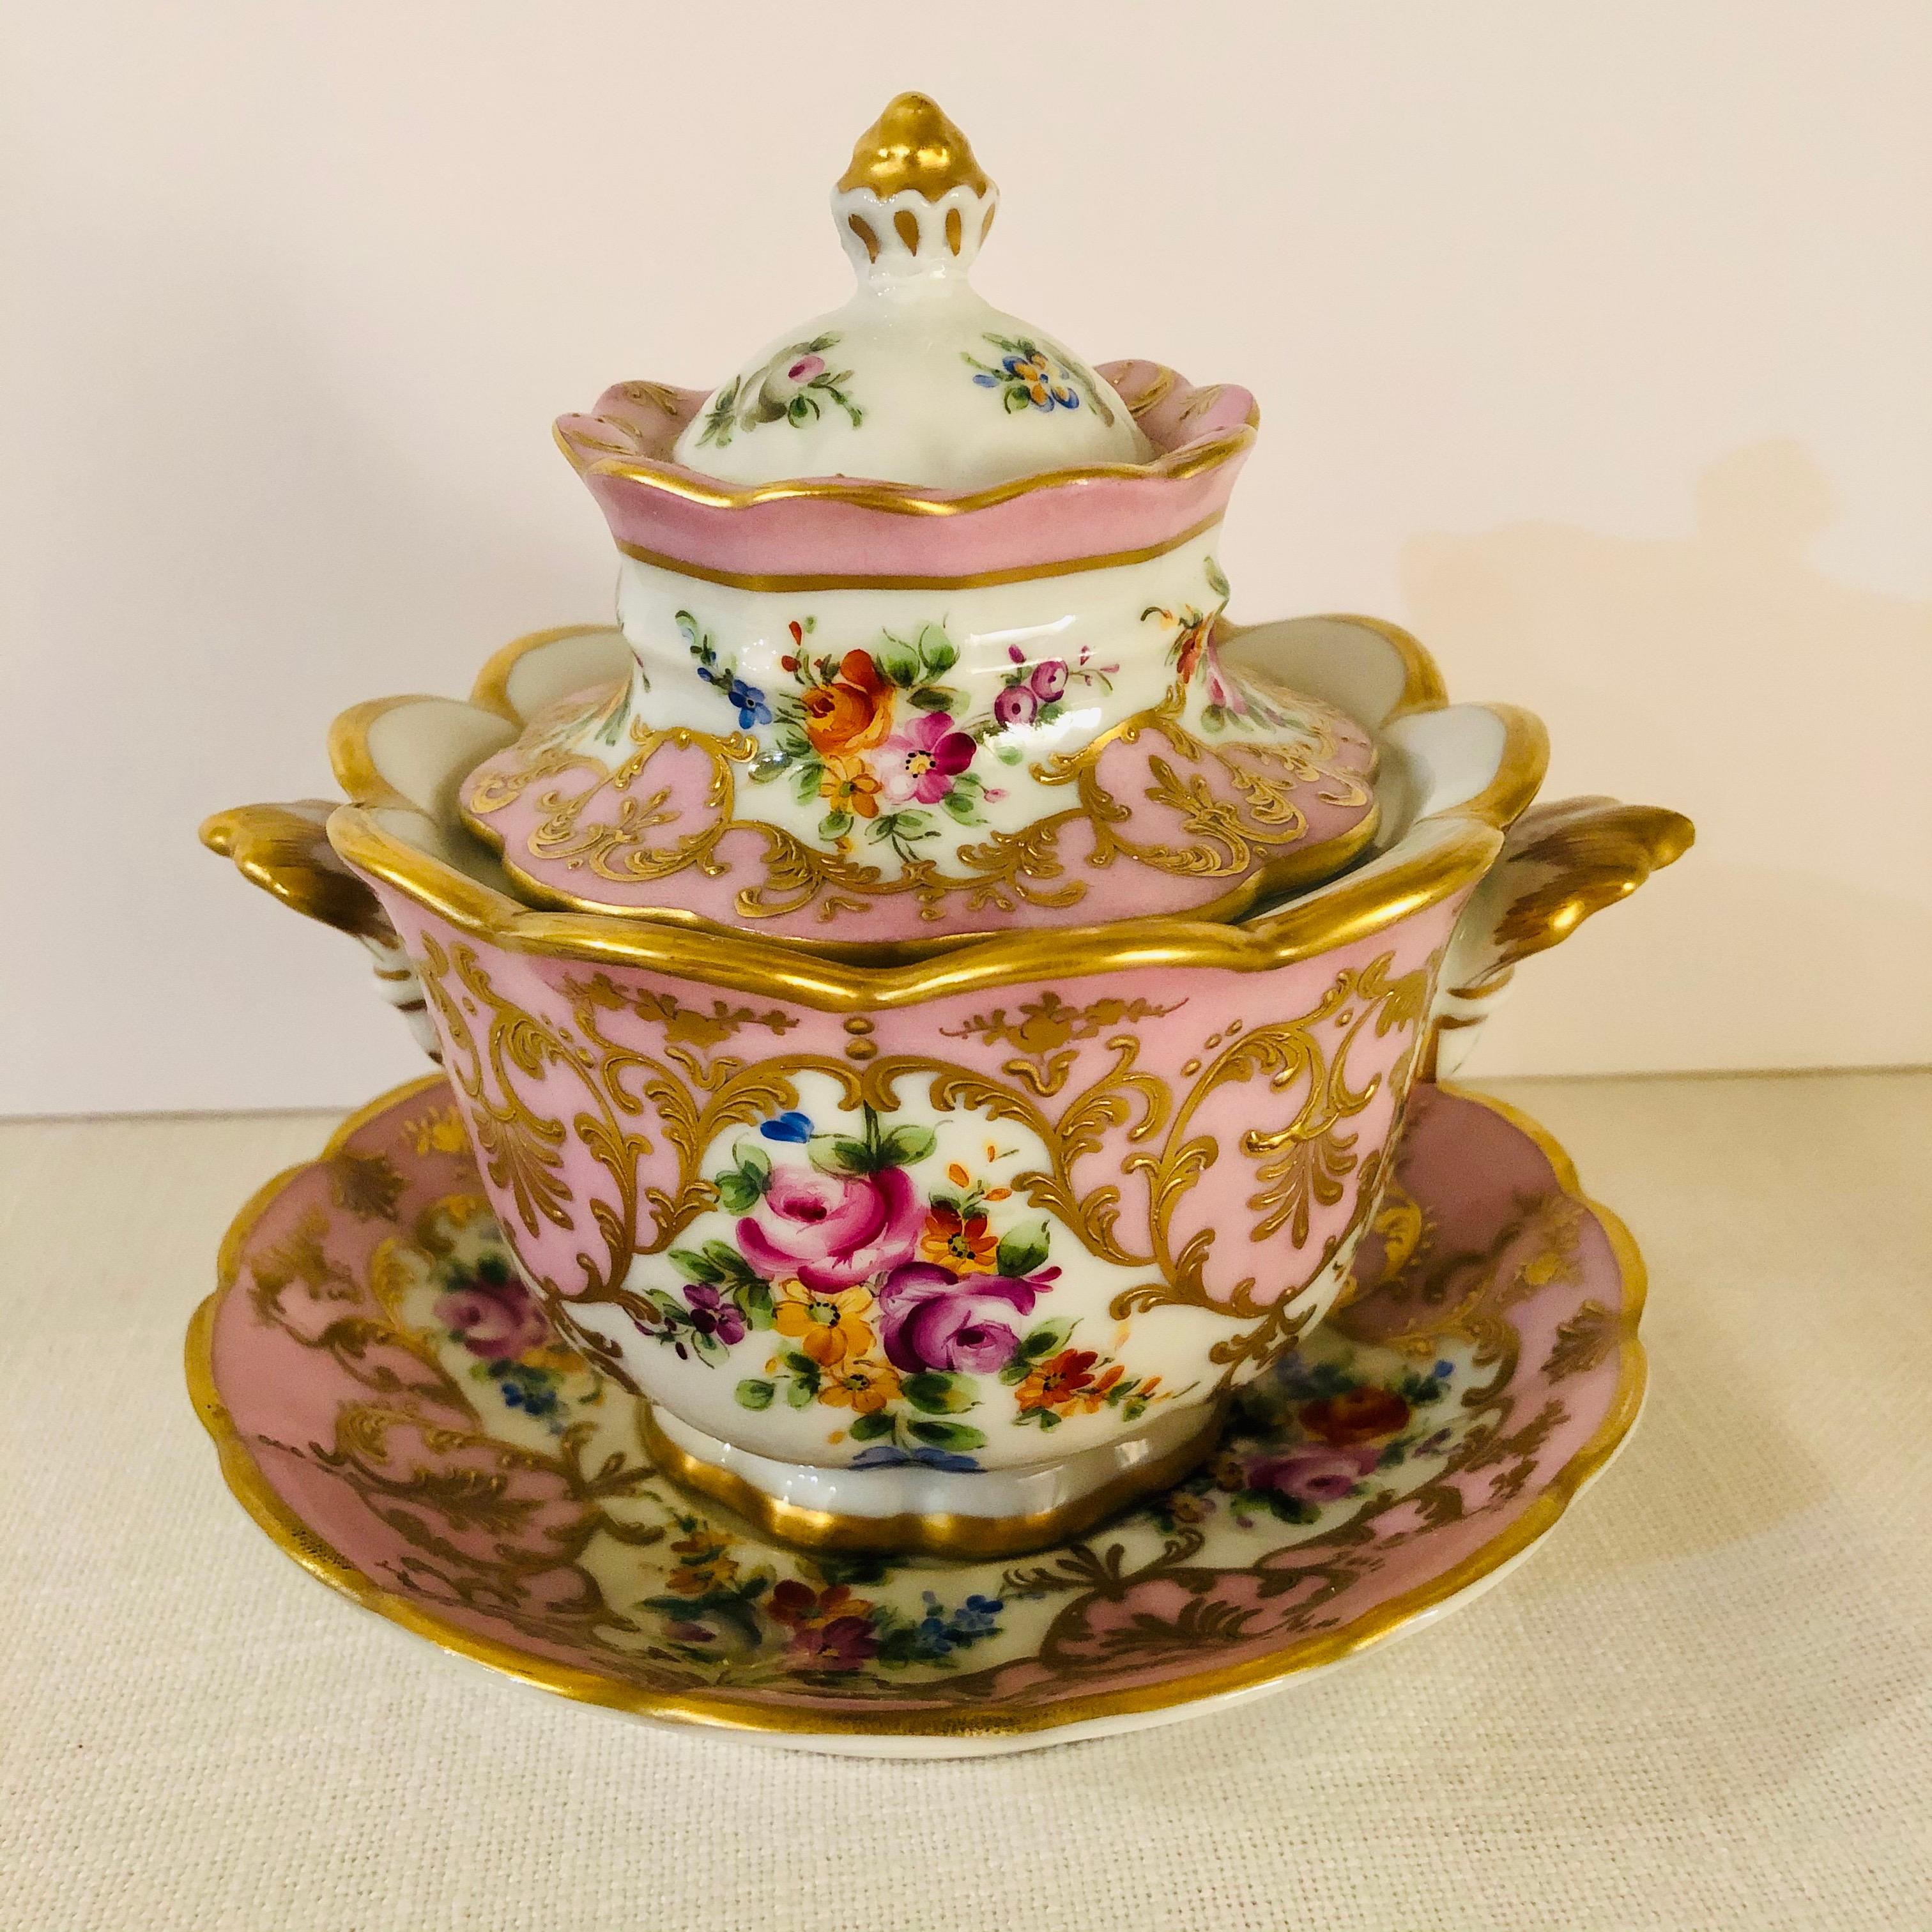 I want to offer you this stunning pink Le Tallec covered bowl with underplate. It has hand-painted flower bouquets on both sides. It has a flower shaped cover. The three pieces are embellished with perfuse raised gilding. It has a pink pompadour